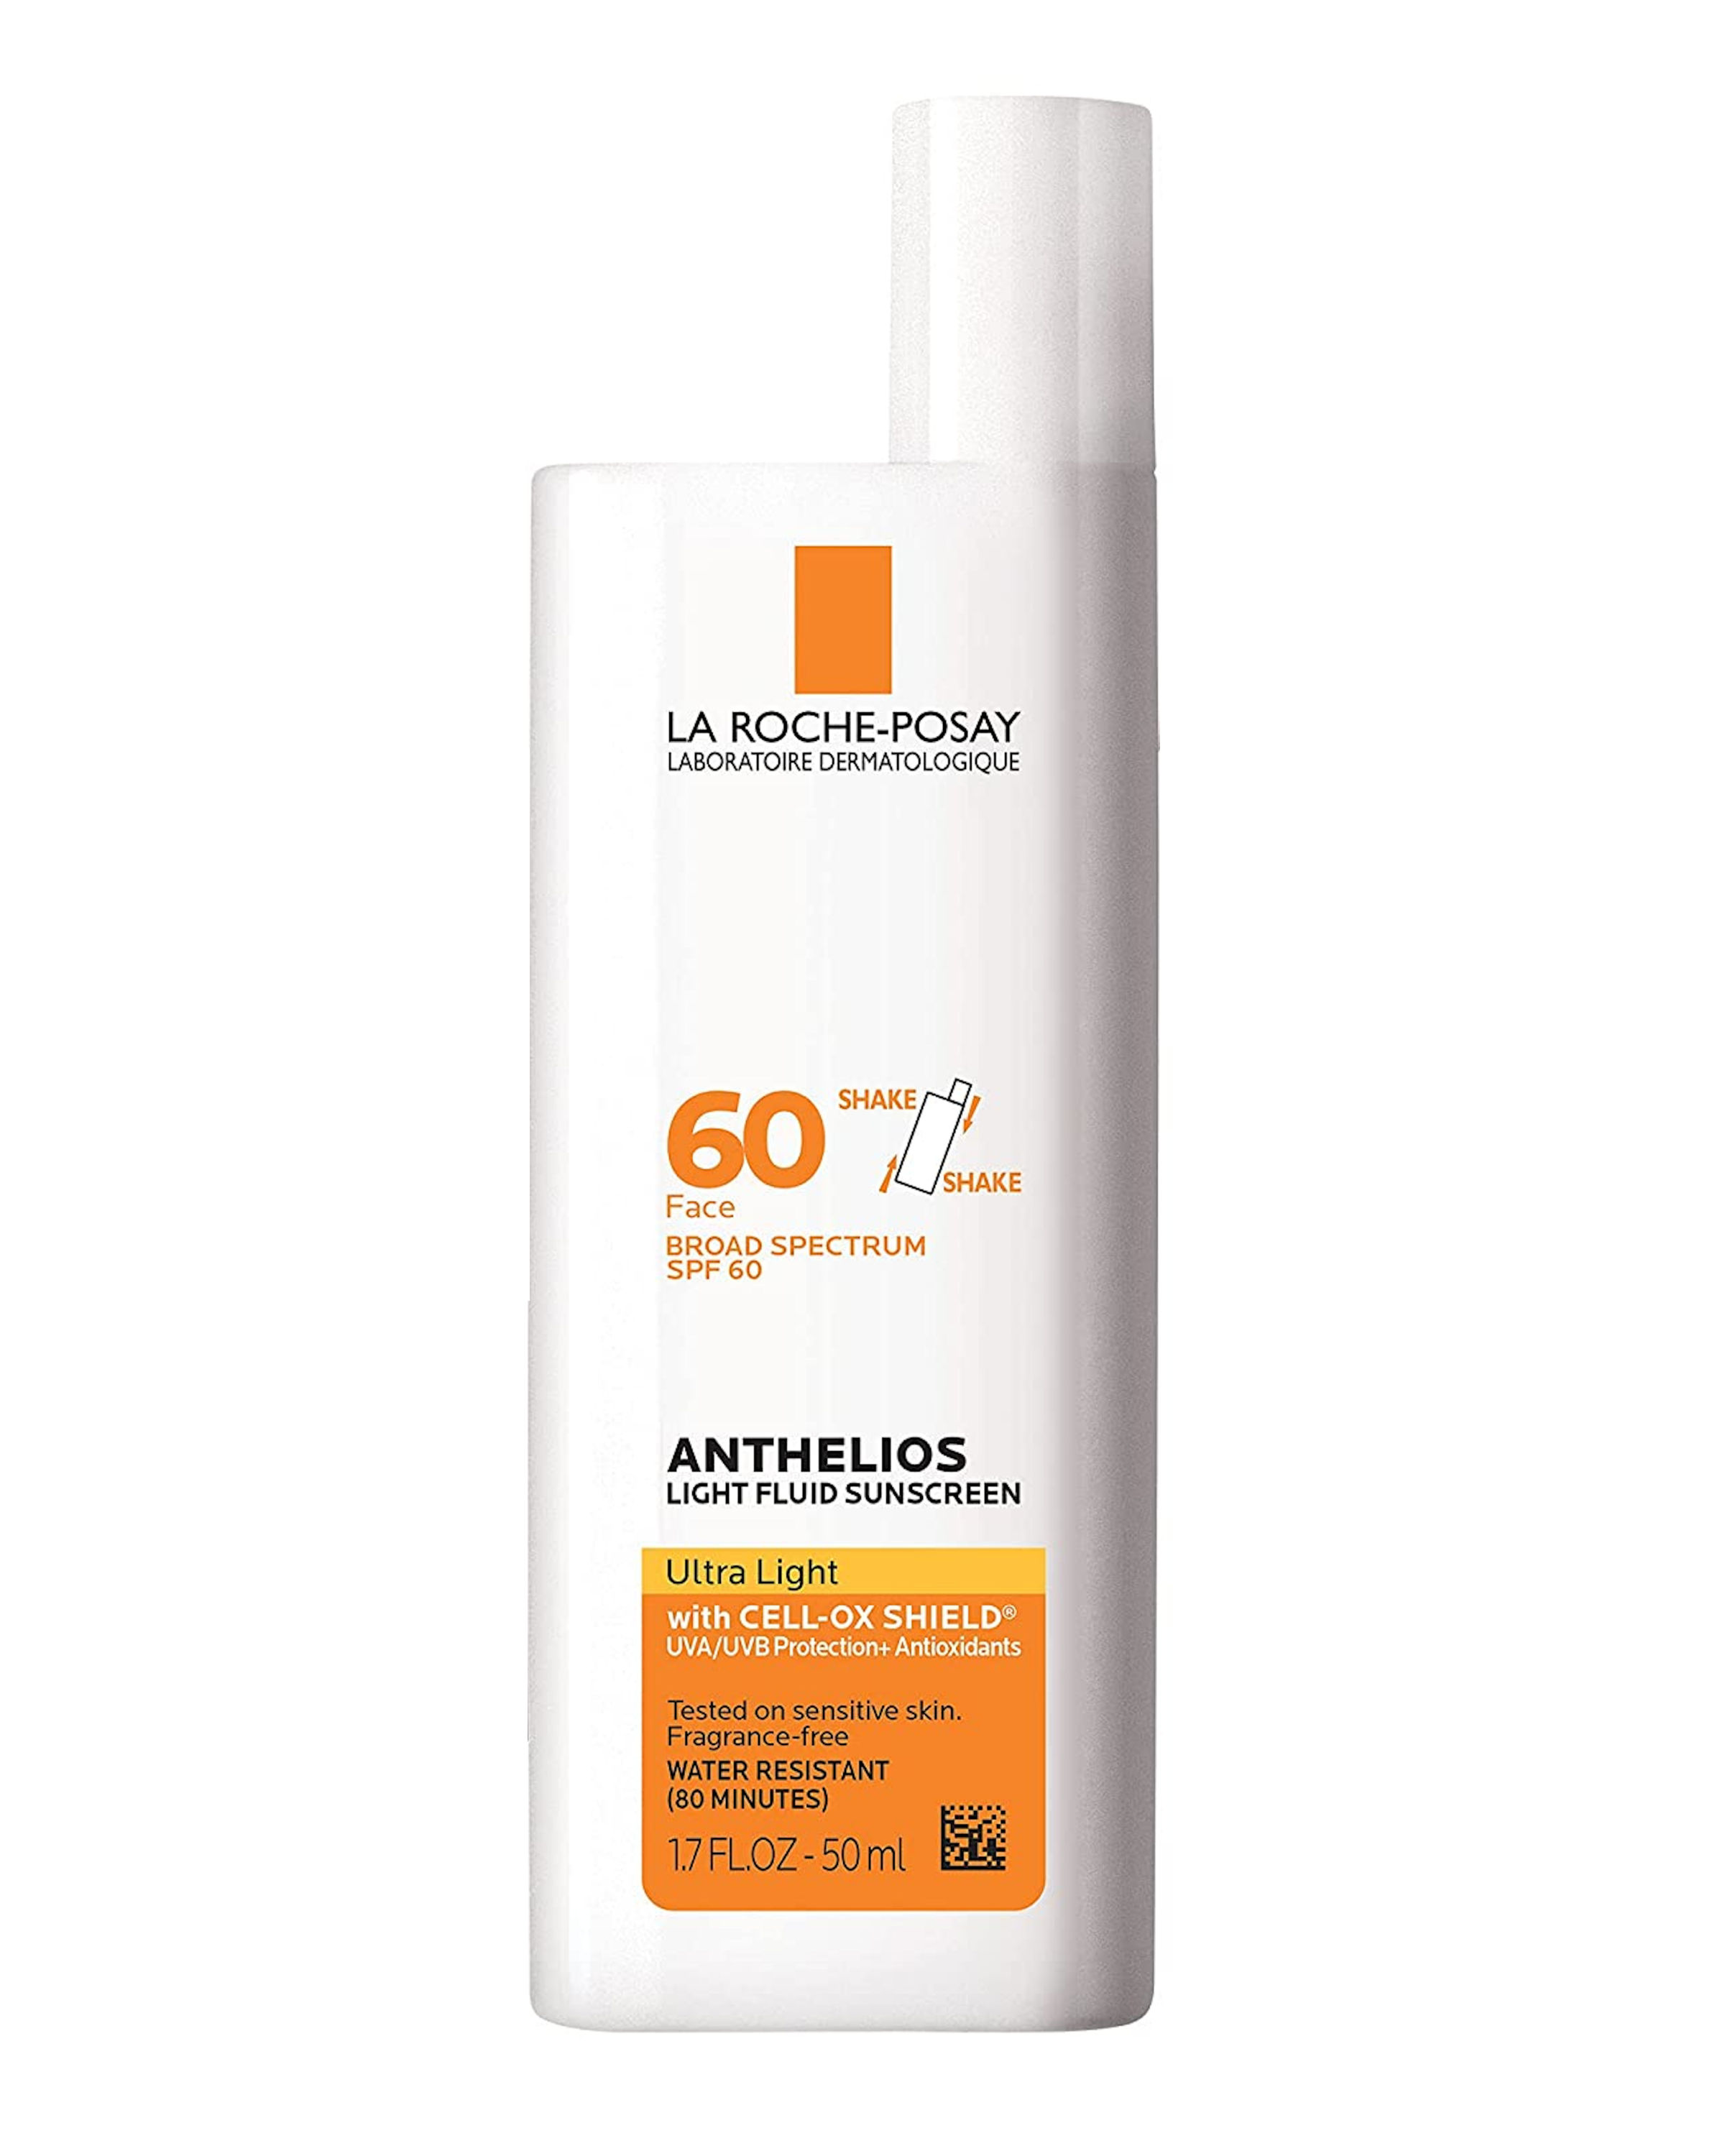 La Roche-Posay Anthelios Ultra Light Sunscreen SPF60 for Face 1.7 fl. oz. (50ml) - image 1 of 2